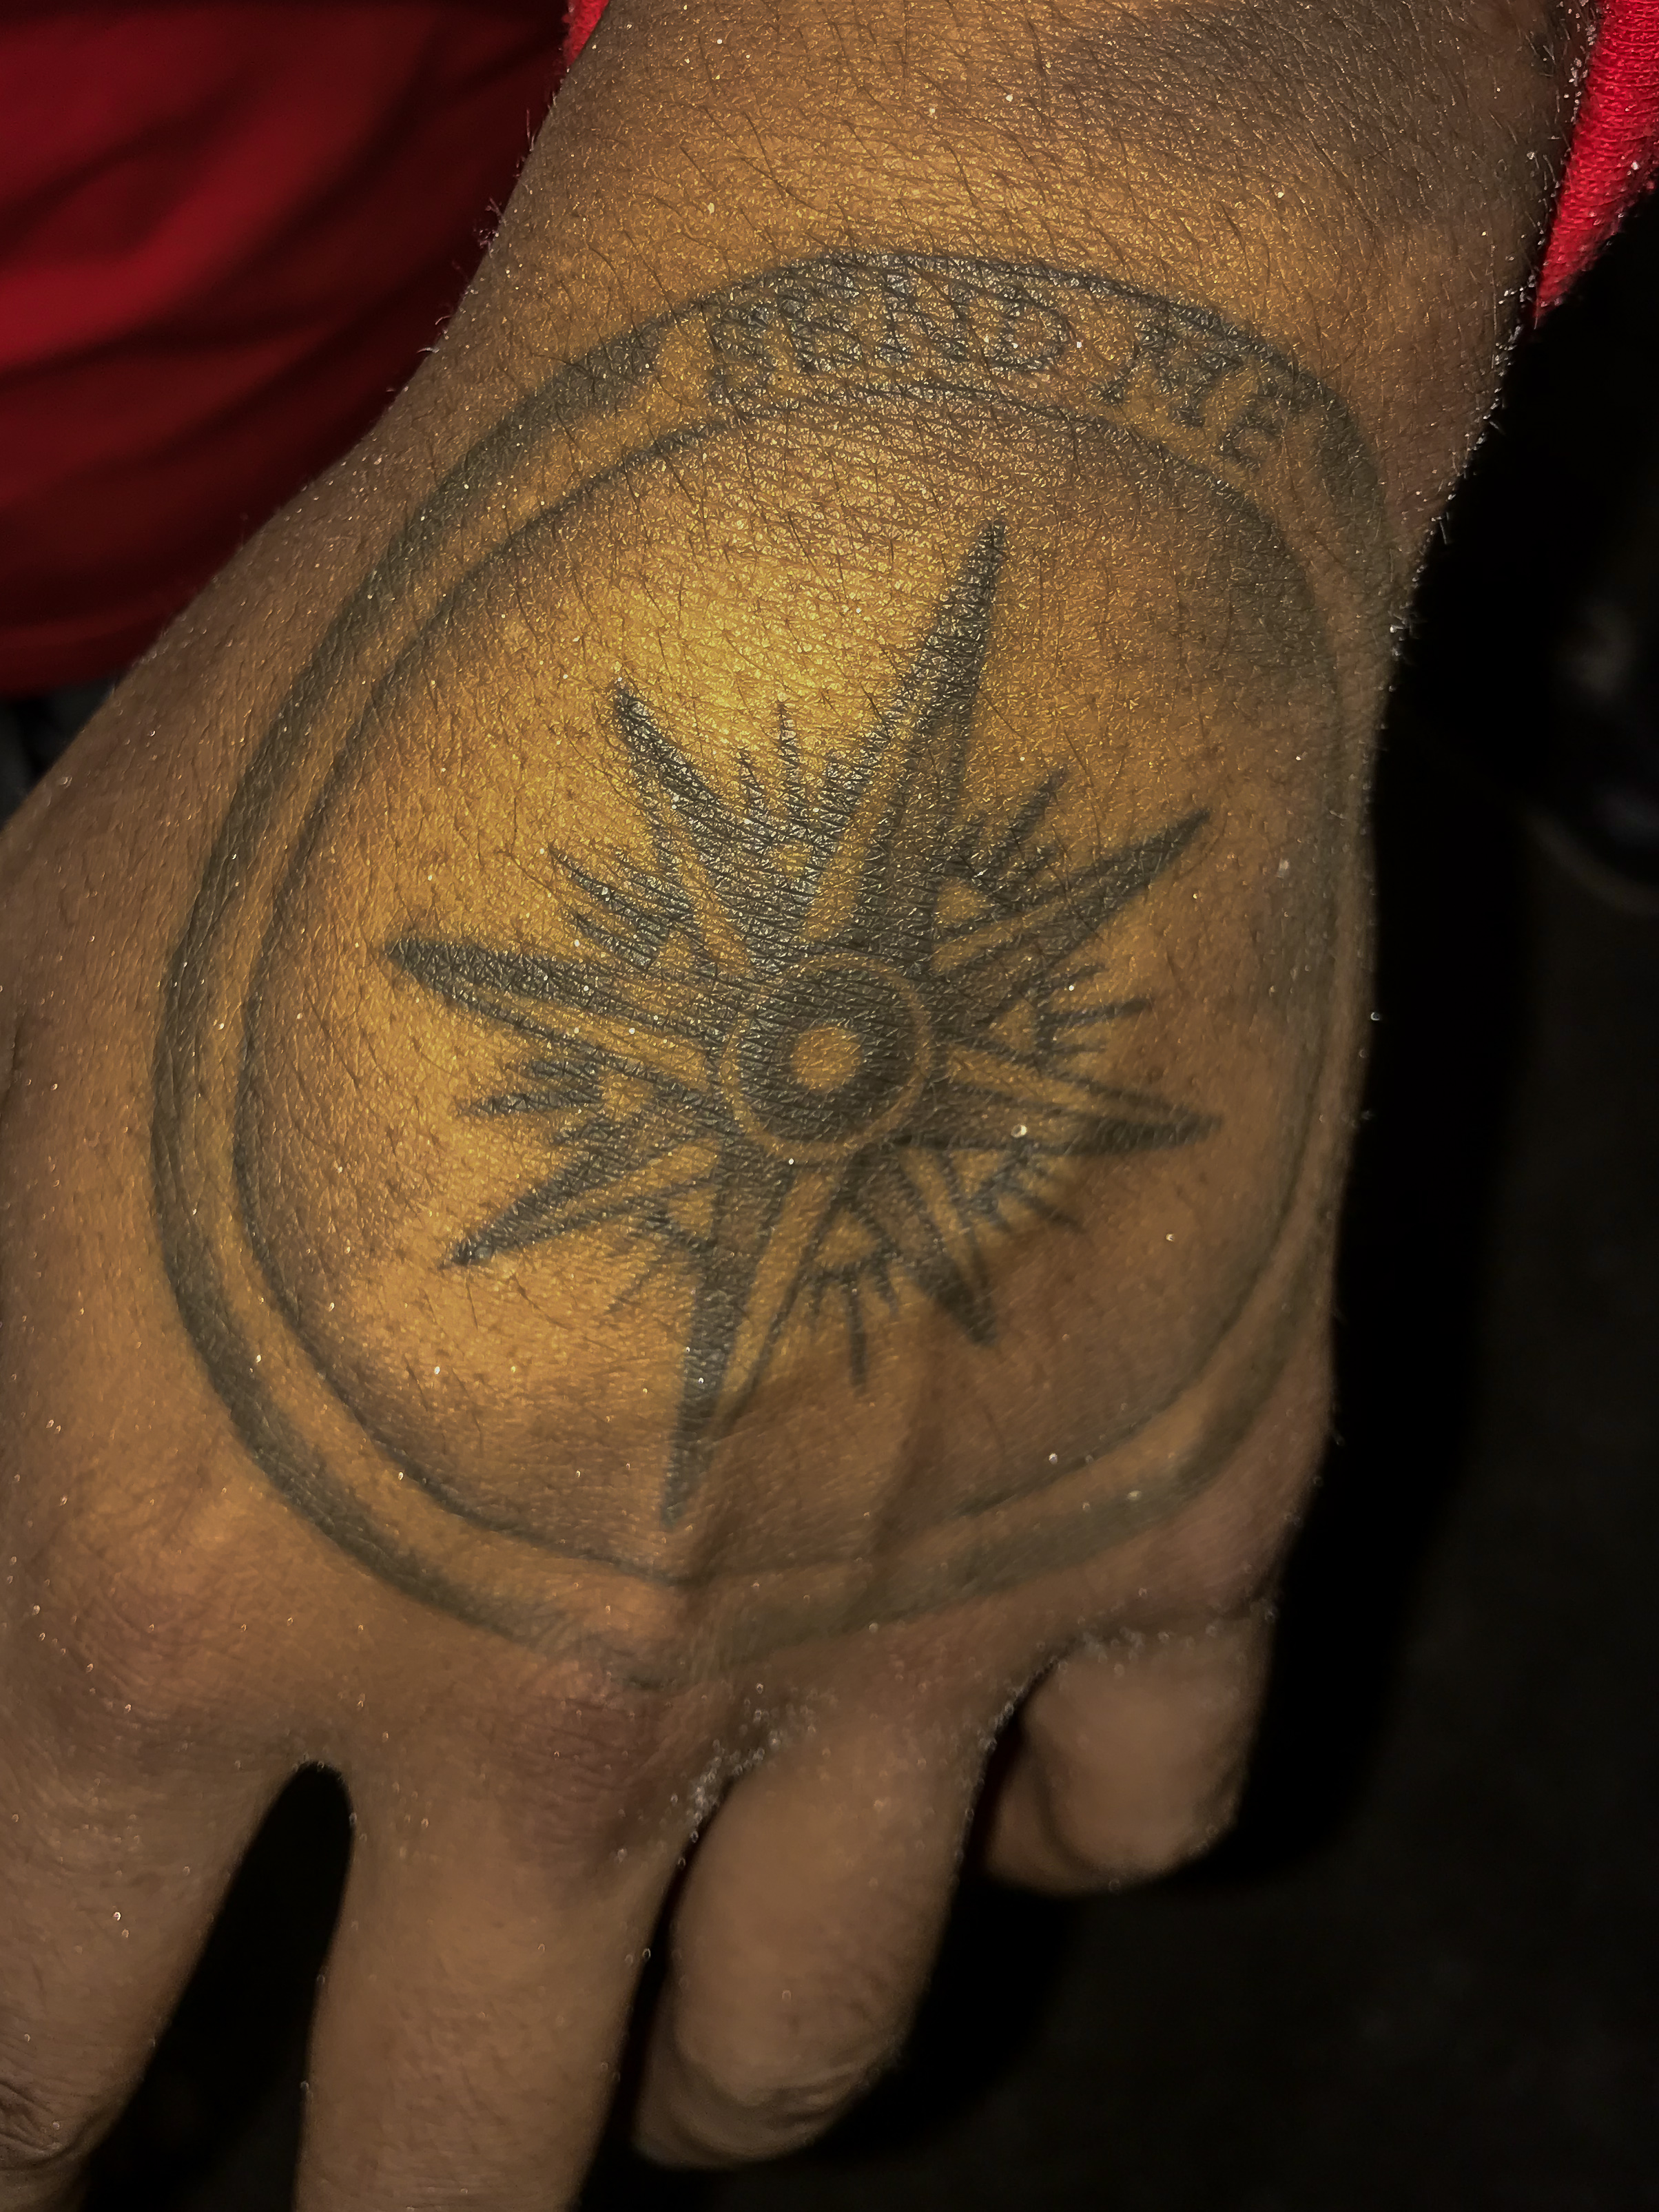 This is one of Lee Palacios tattoos. Palacios got this tattoo on his second mission trip while in Cuba. The top of the compass says Send Me to represent the calling he feels God has placed in Palacios life.